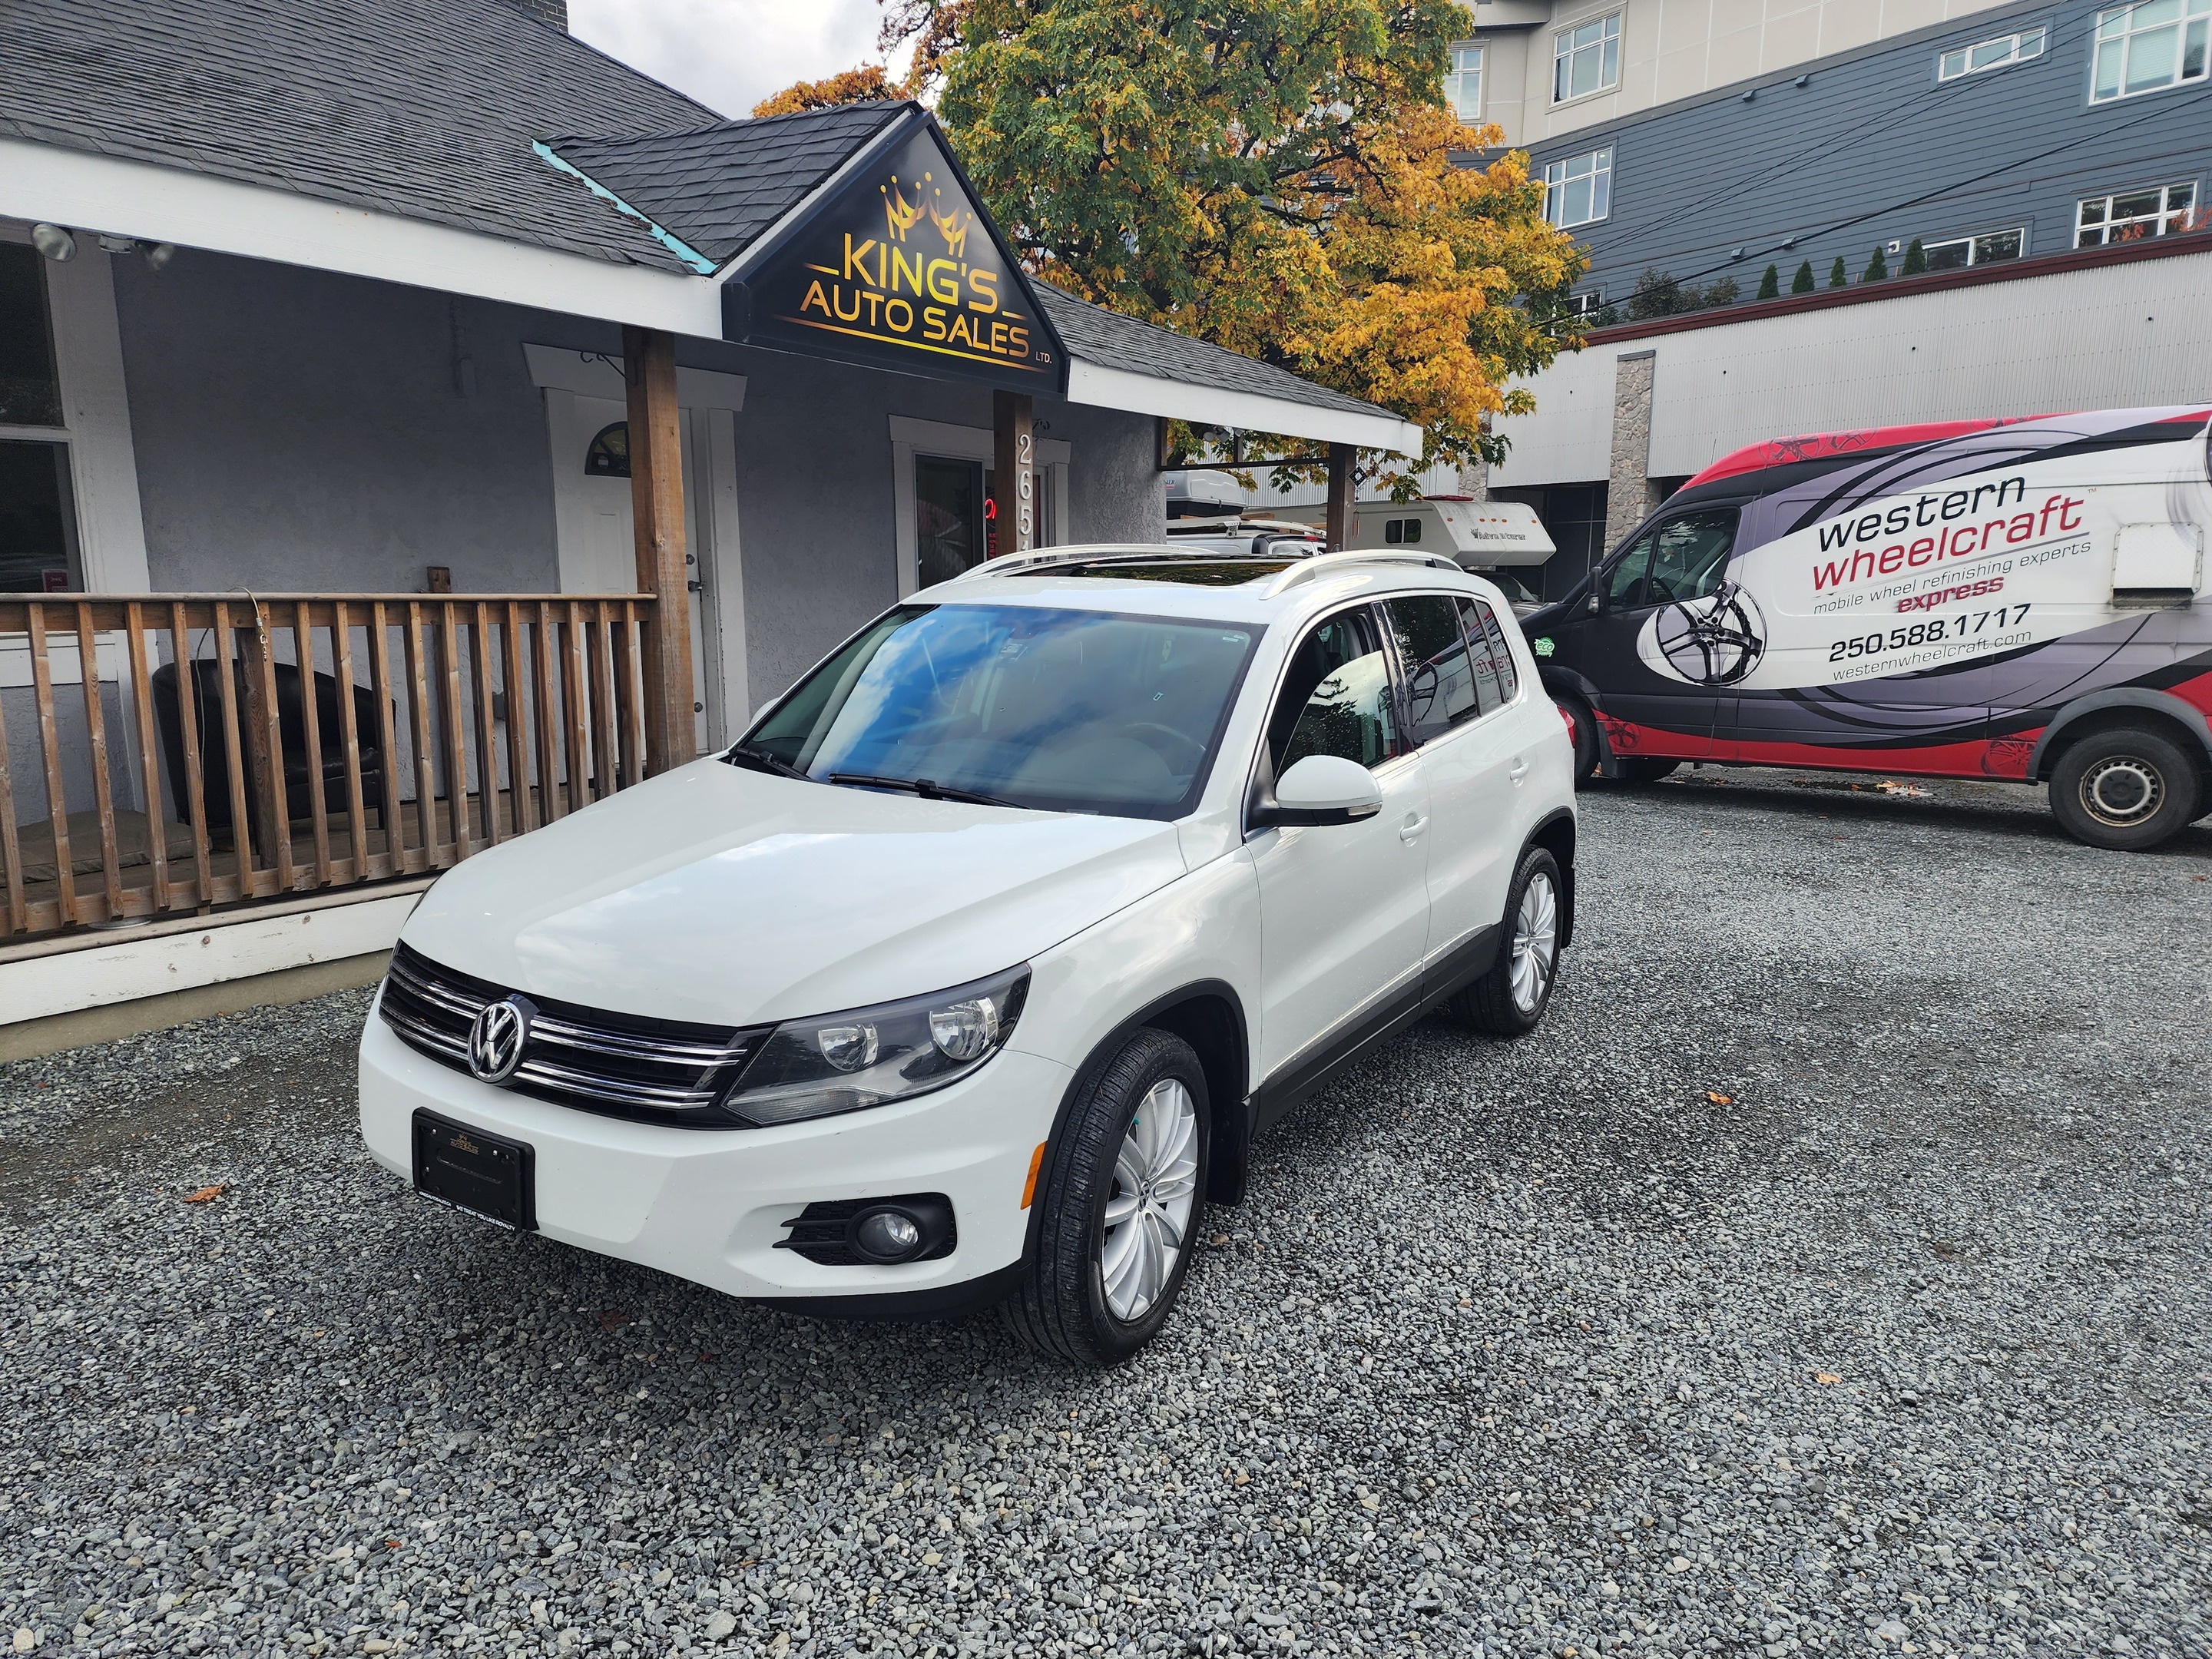 2016 Volkswagen Tiguan 4MOTION 4dr Auto Highline, Pano Roof, Leather, Nav